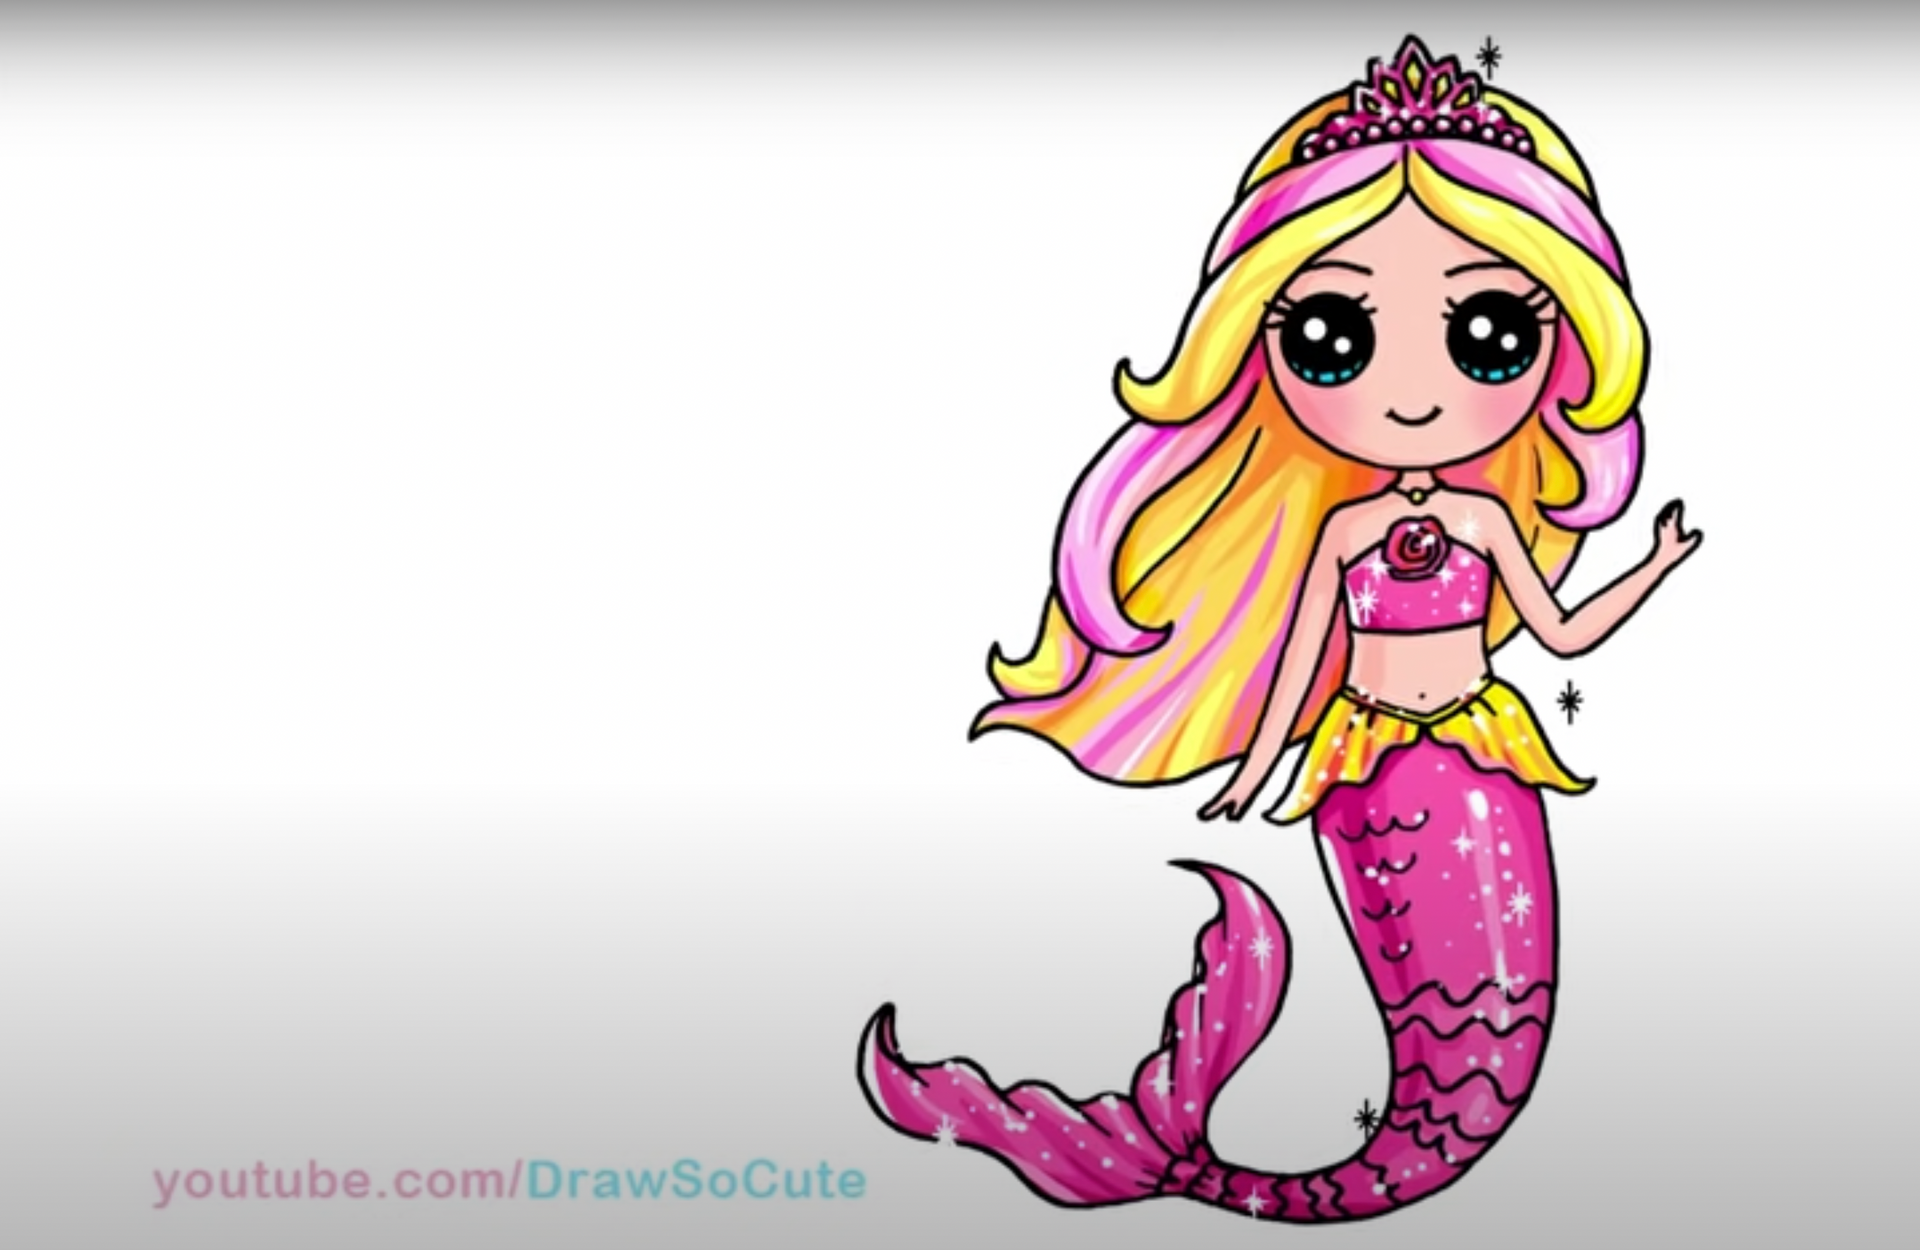 A FEW LINES ABOUT LINE: How Old Is Your Mermaid?